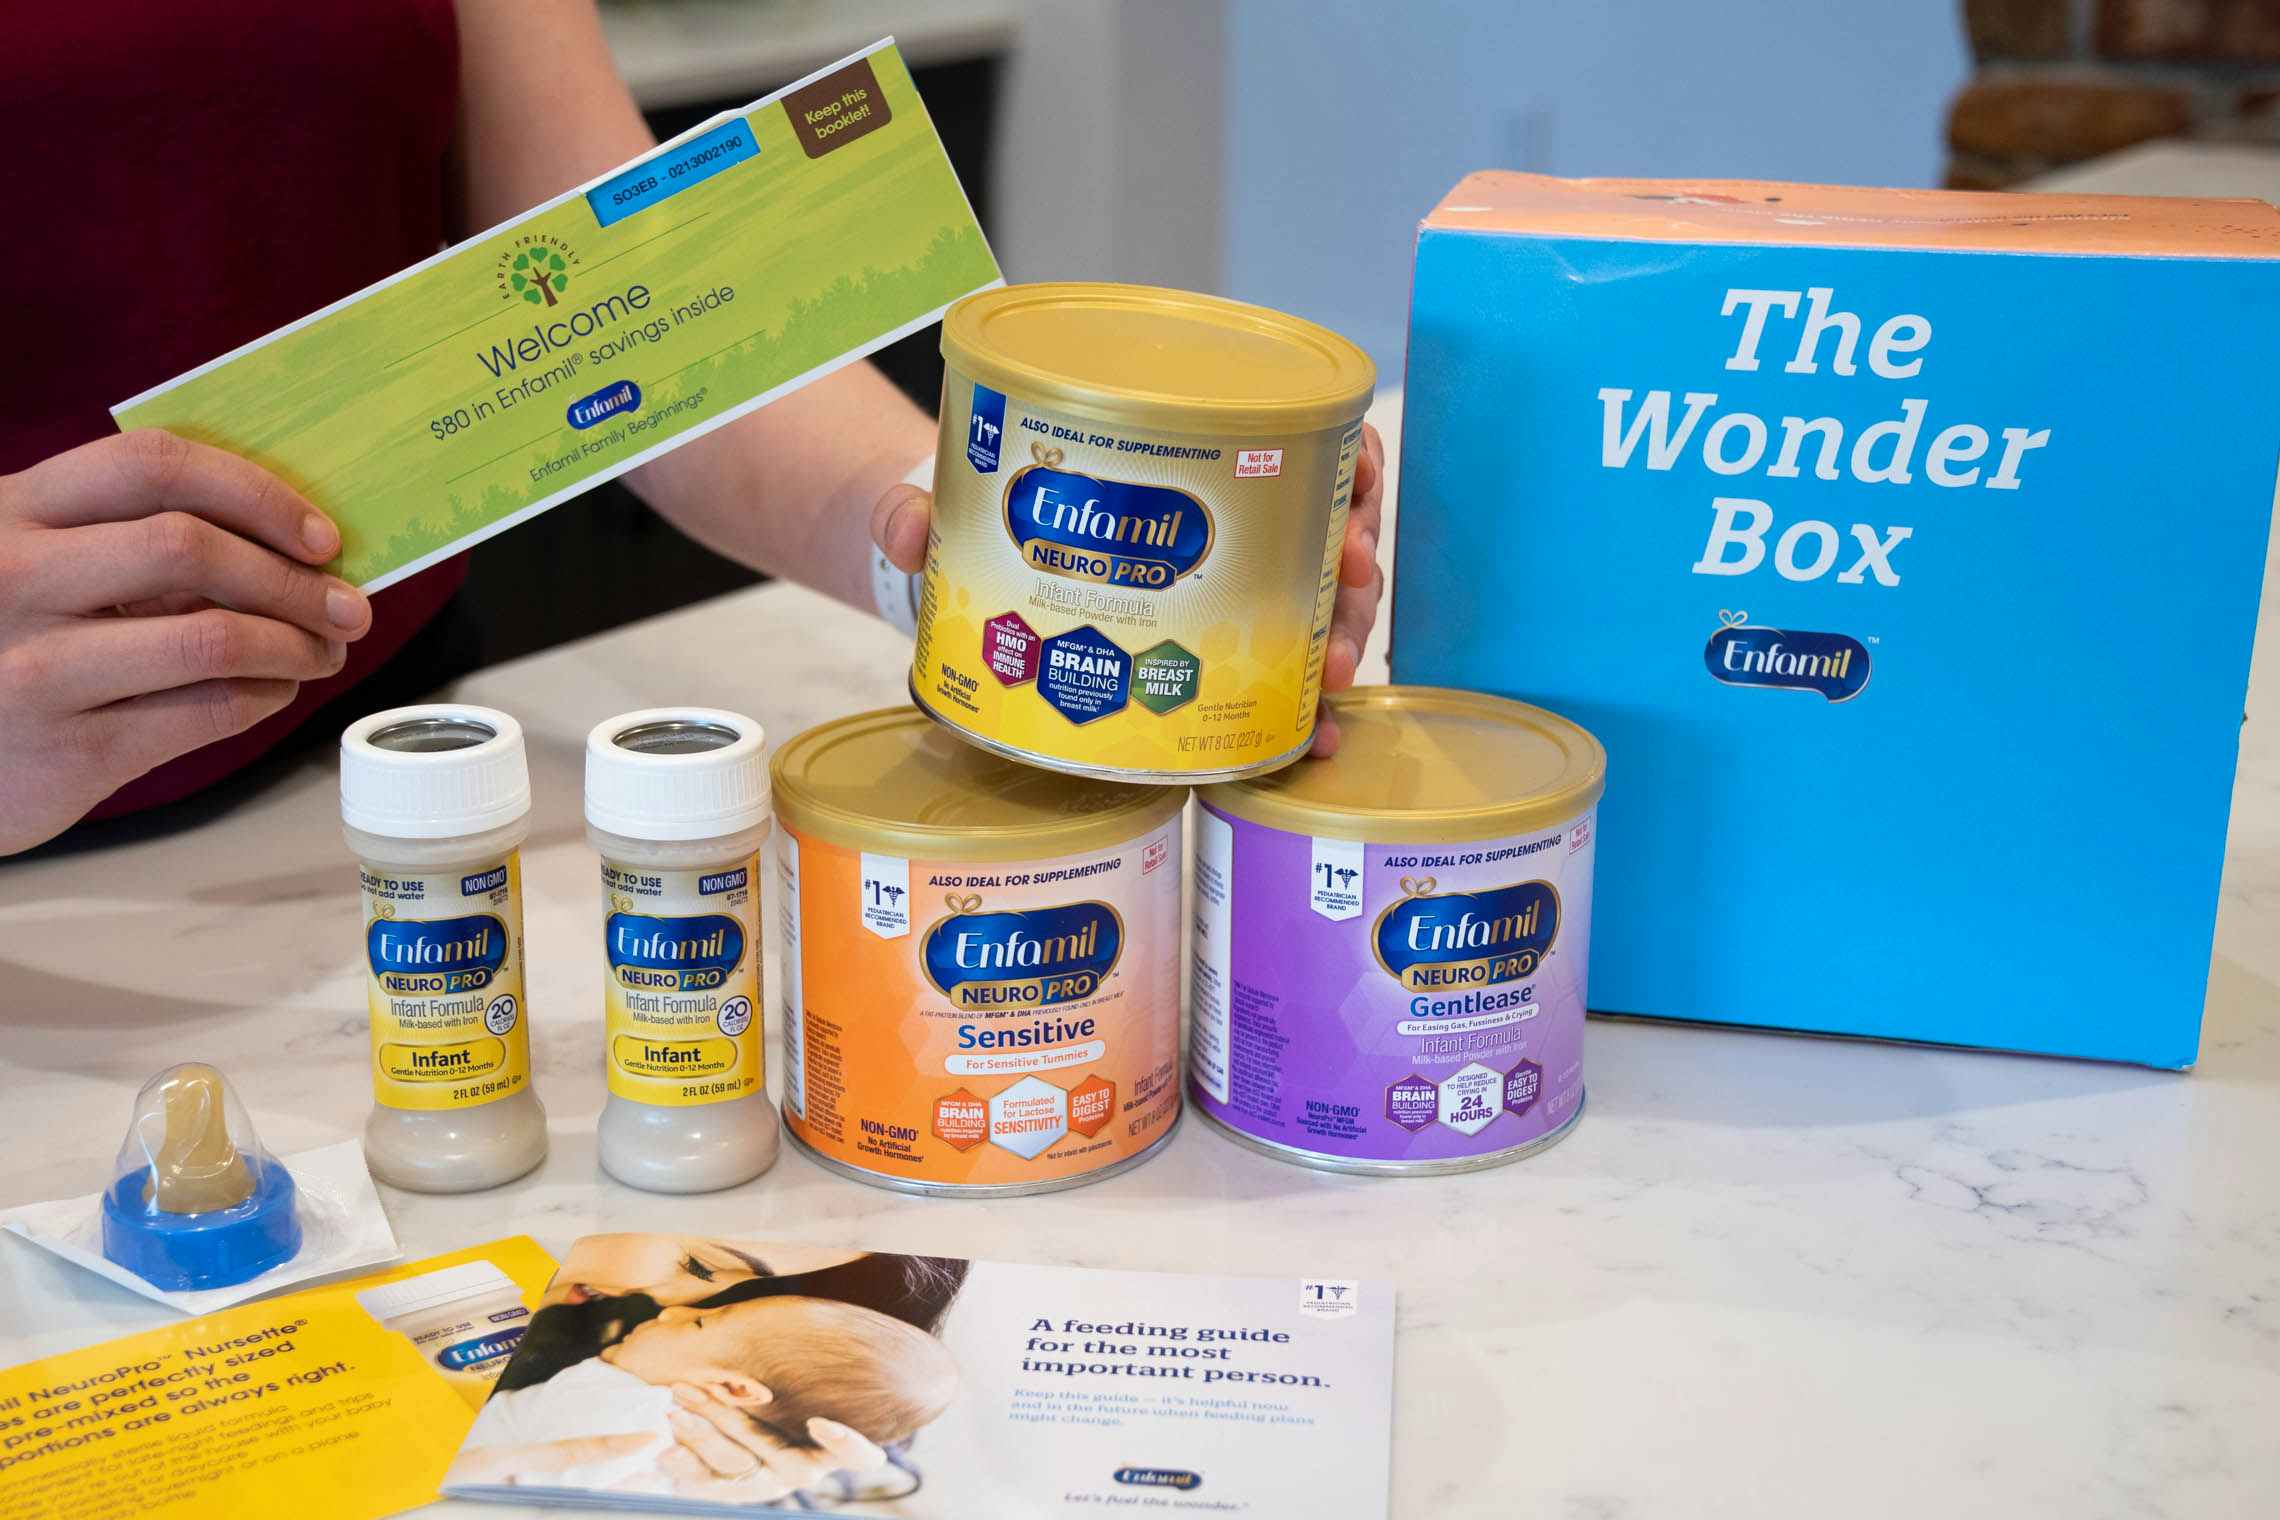 The Wonder Box, enfamil formula baby sample freebie box, sitting on a counter next to its contents.